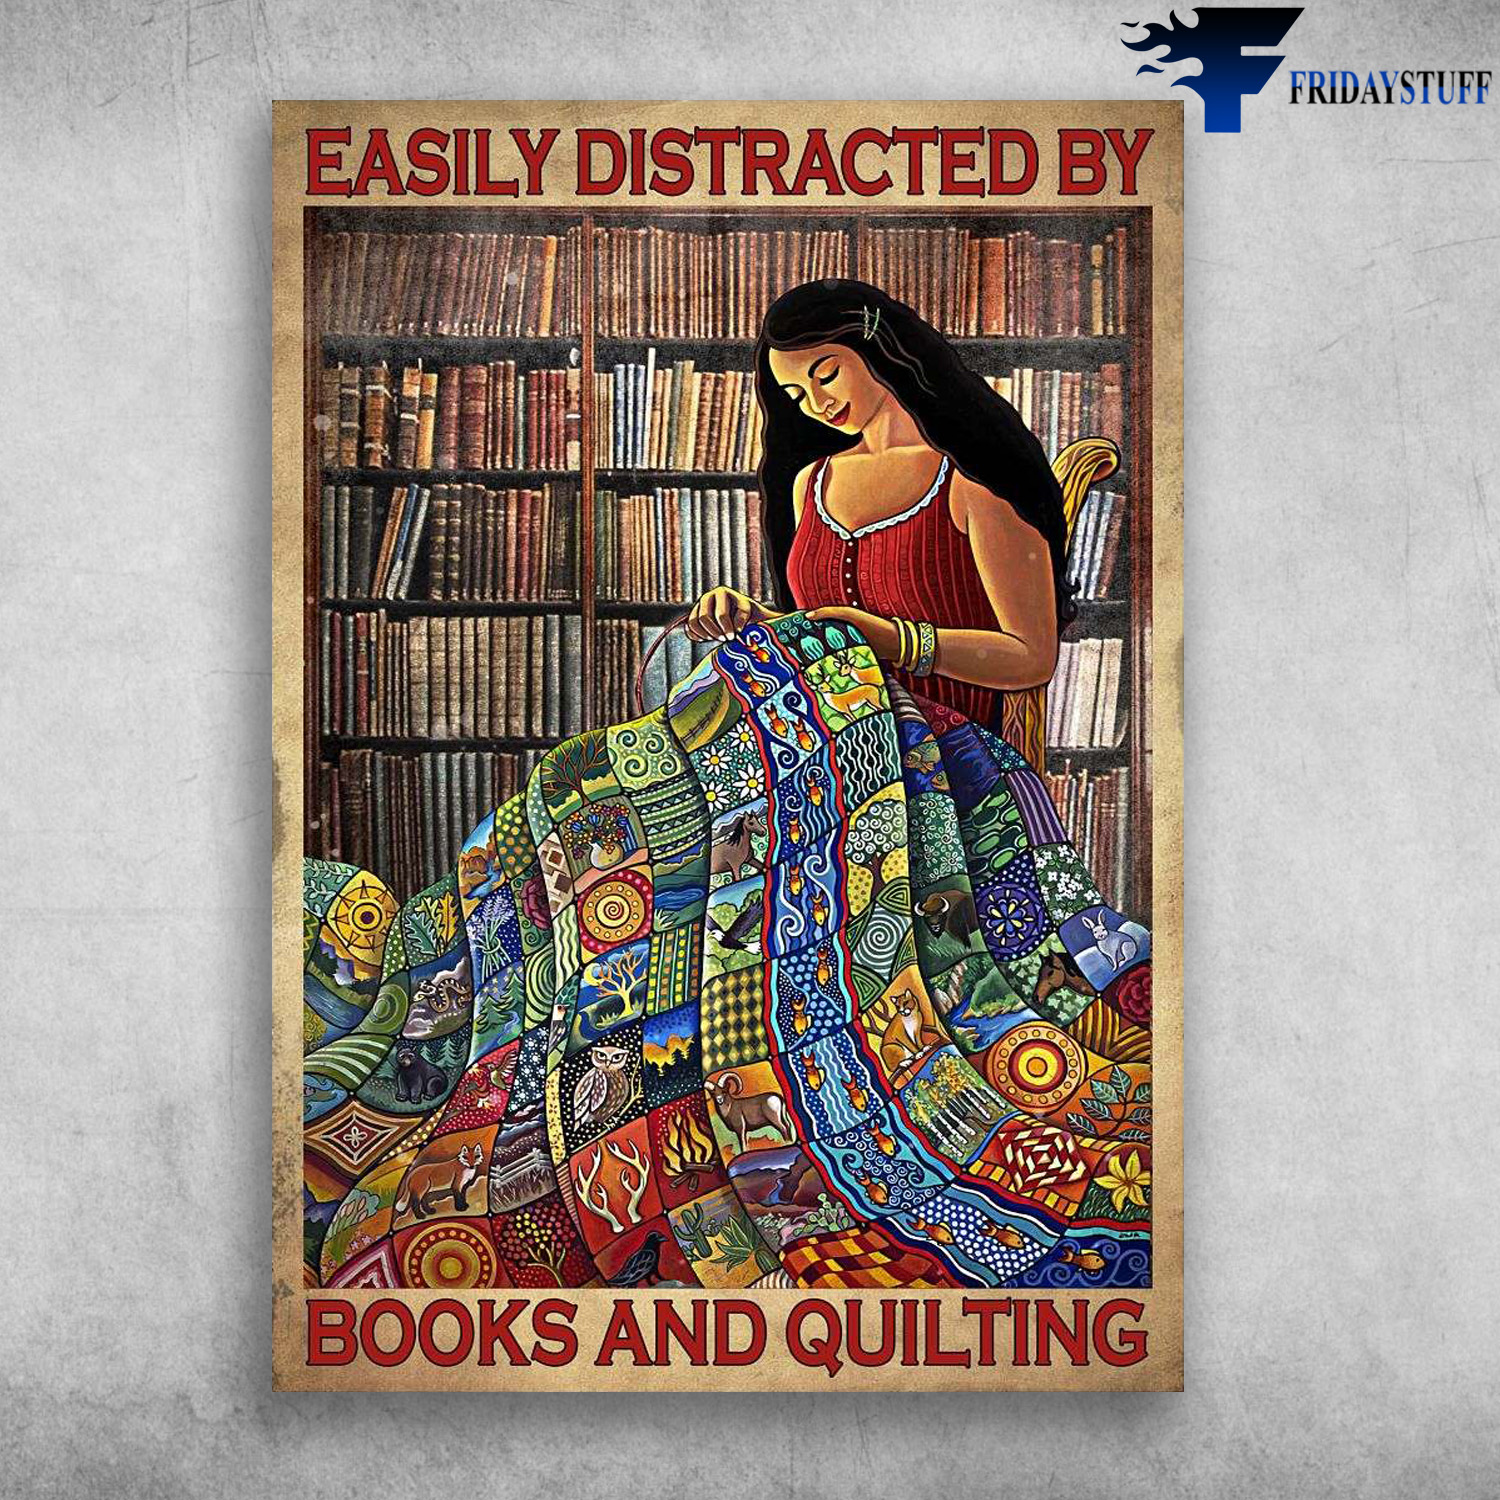 Lady Quilting - Easily Distracted By, Books And Quilting